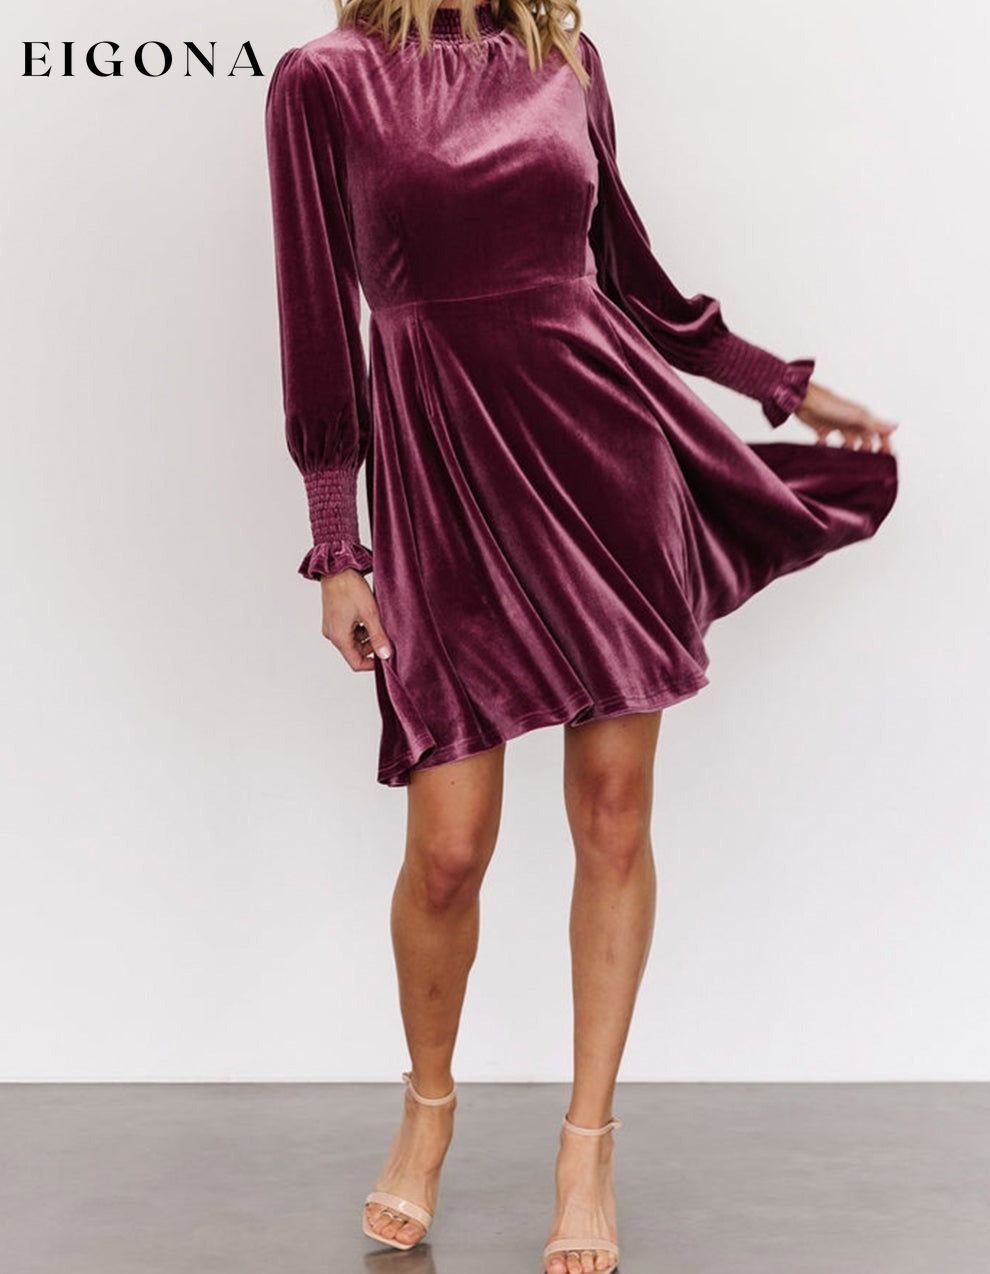 Burgundy Long Sleeve Dress, Smocked High Neck Flounce Sleeve Velvet Dress All In Stock casual dresses clothes Color Pink Day Valentine's Day dress dresses EDM Monthly Recomend Fabric Velvet long sleeve dress long sleeve dresses Occasion Daily Print Solid Color Season Winter short dresses Silhouette A-Line Style Southern Belle